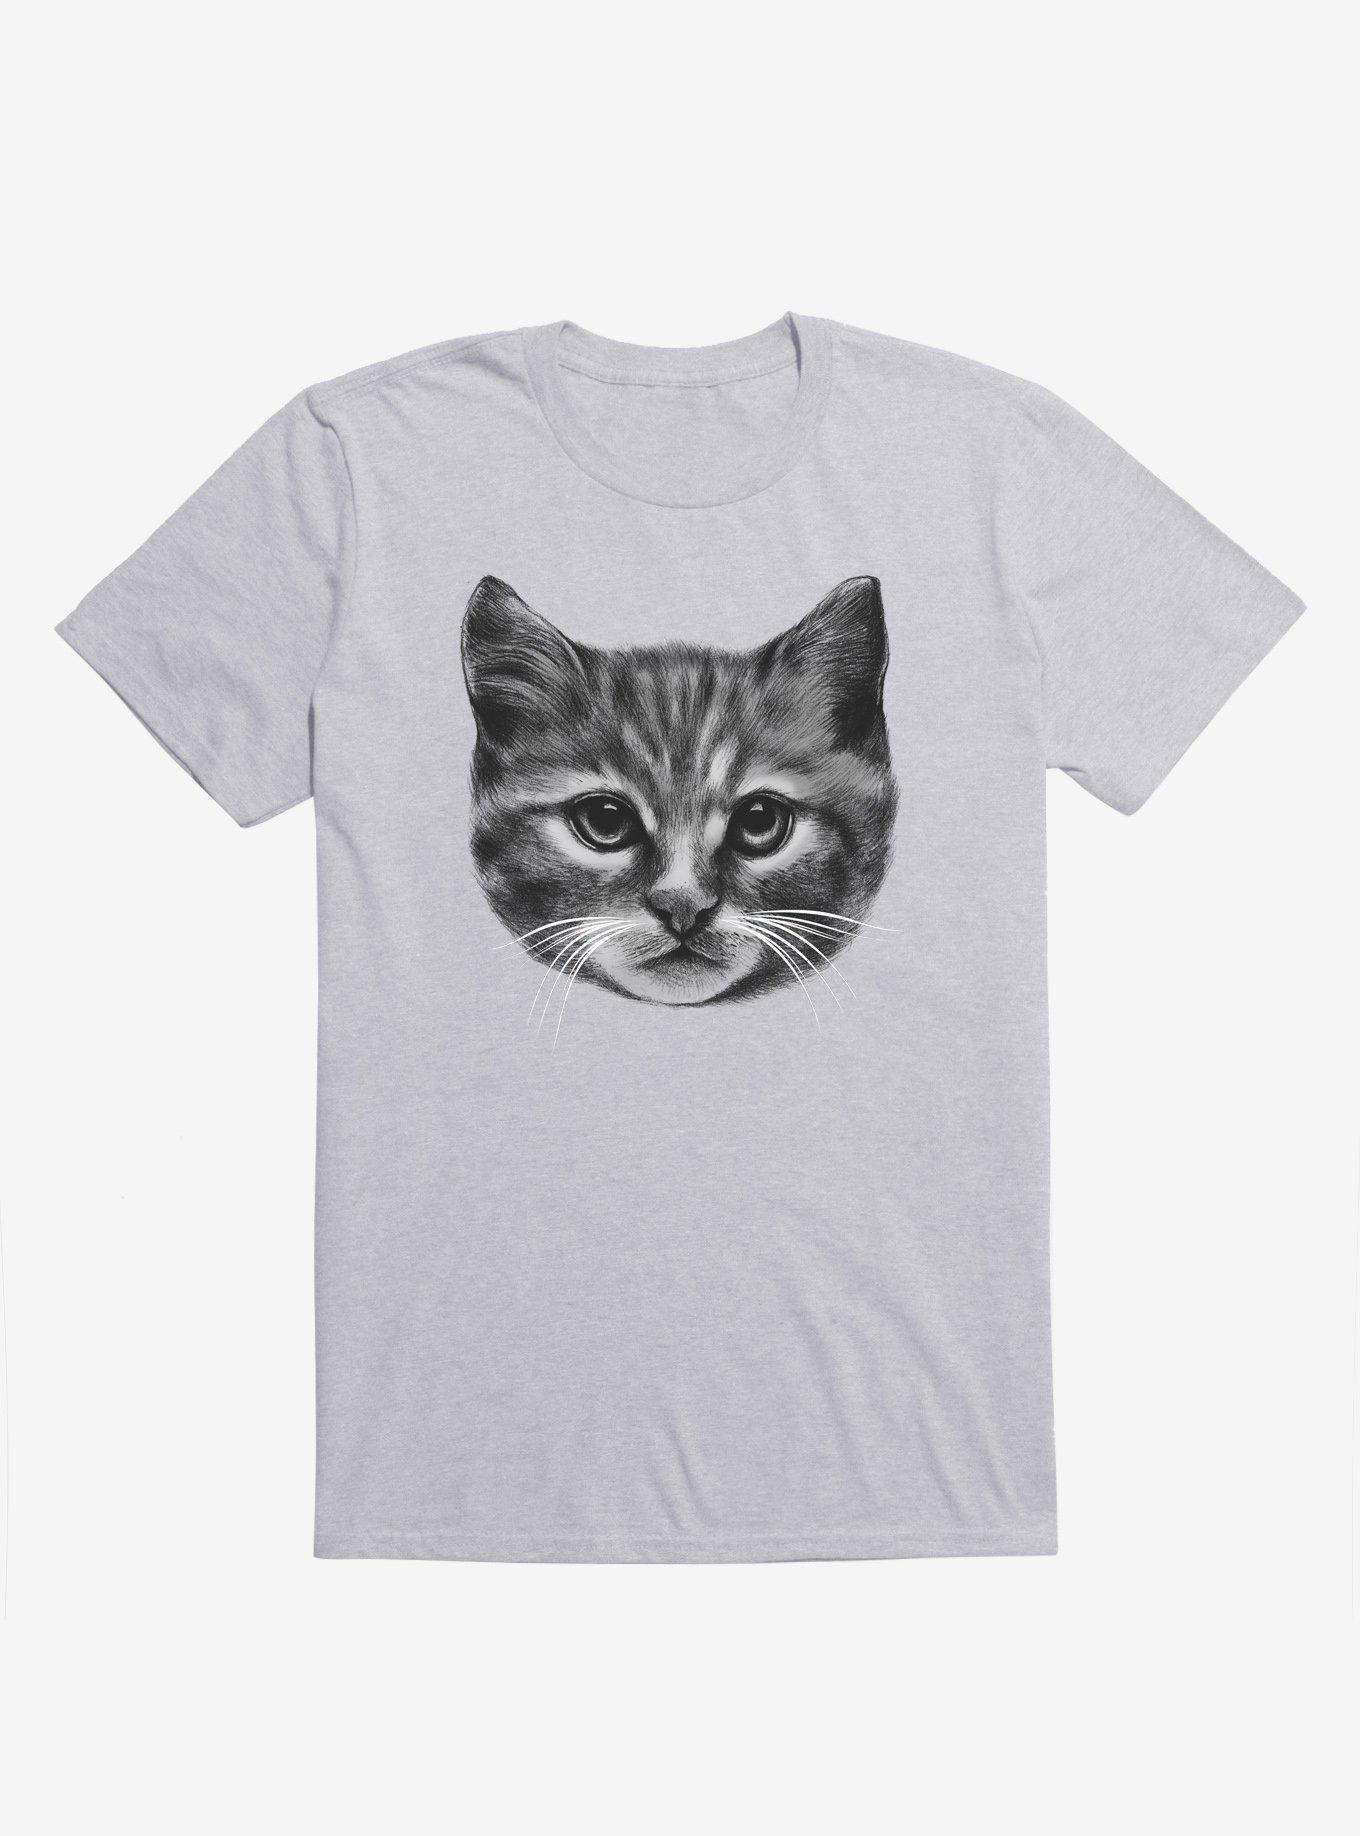 Everybody Wants To Be A Cat Sport Grey T-Shirt, SPORT GRAY, hi-res